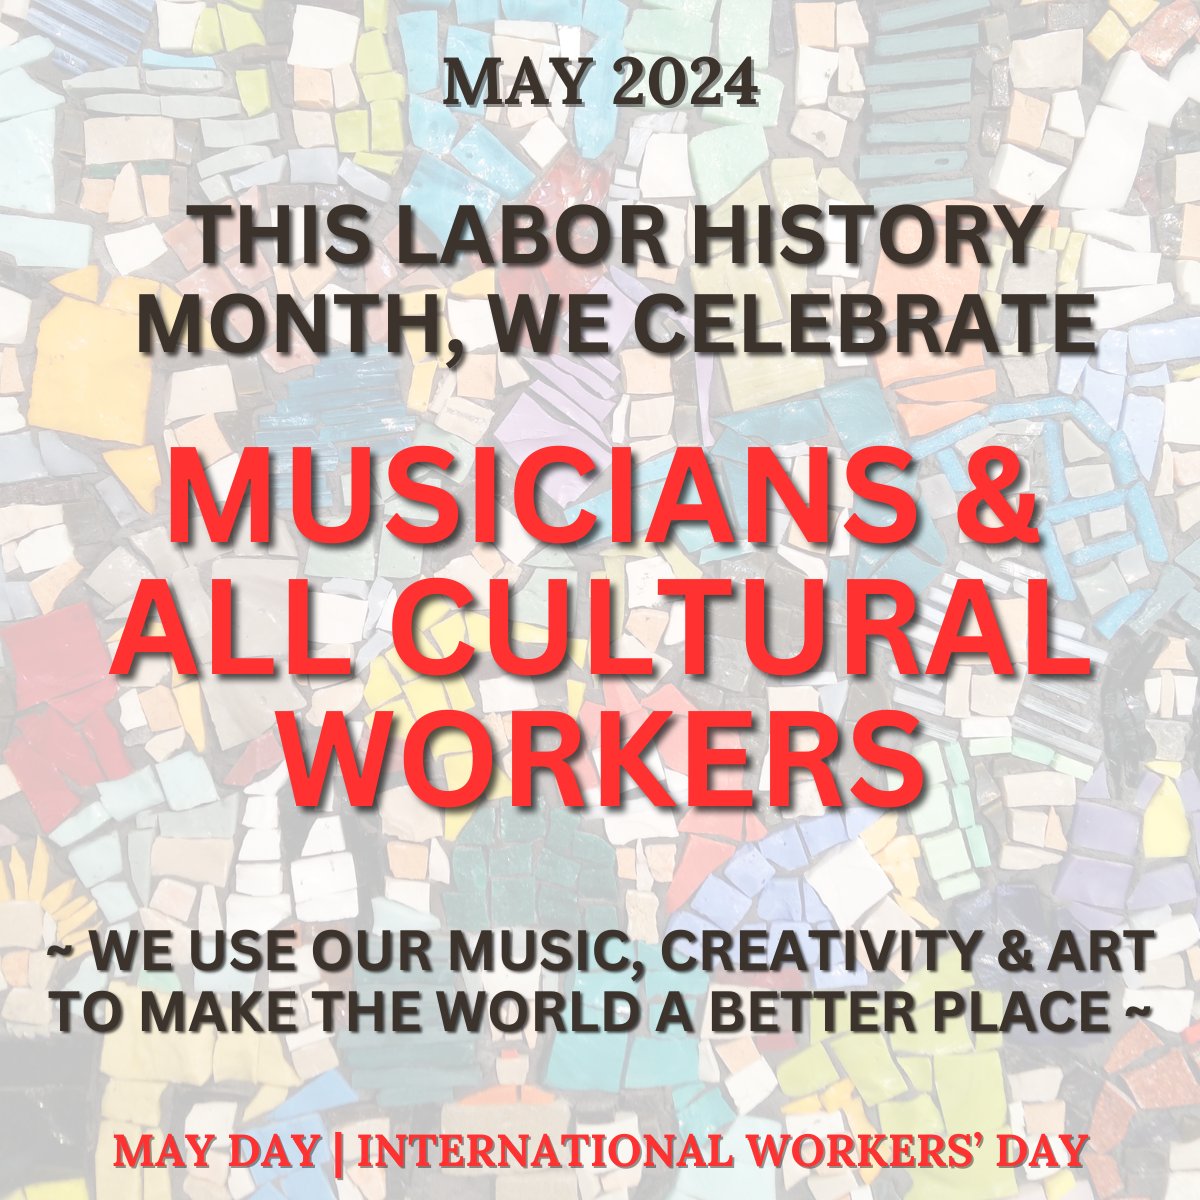 HAPPY LABOR HISTORY MONTH! We celebrate musicians and all cultural workers who use their music and creativity to make the world a better place!

#LaborHistoryMonth
#MayDay
#InternationalWorkersDay